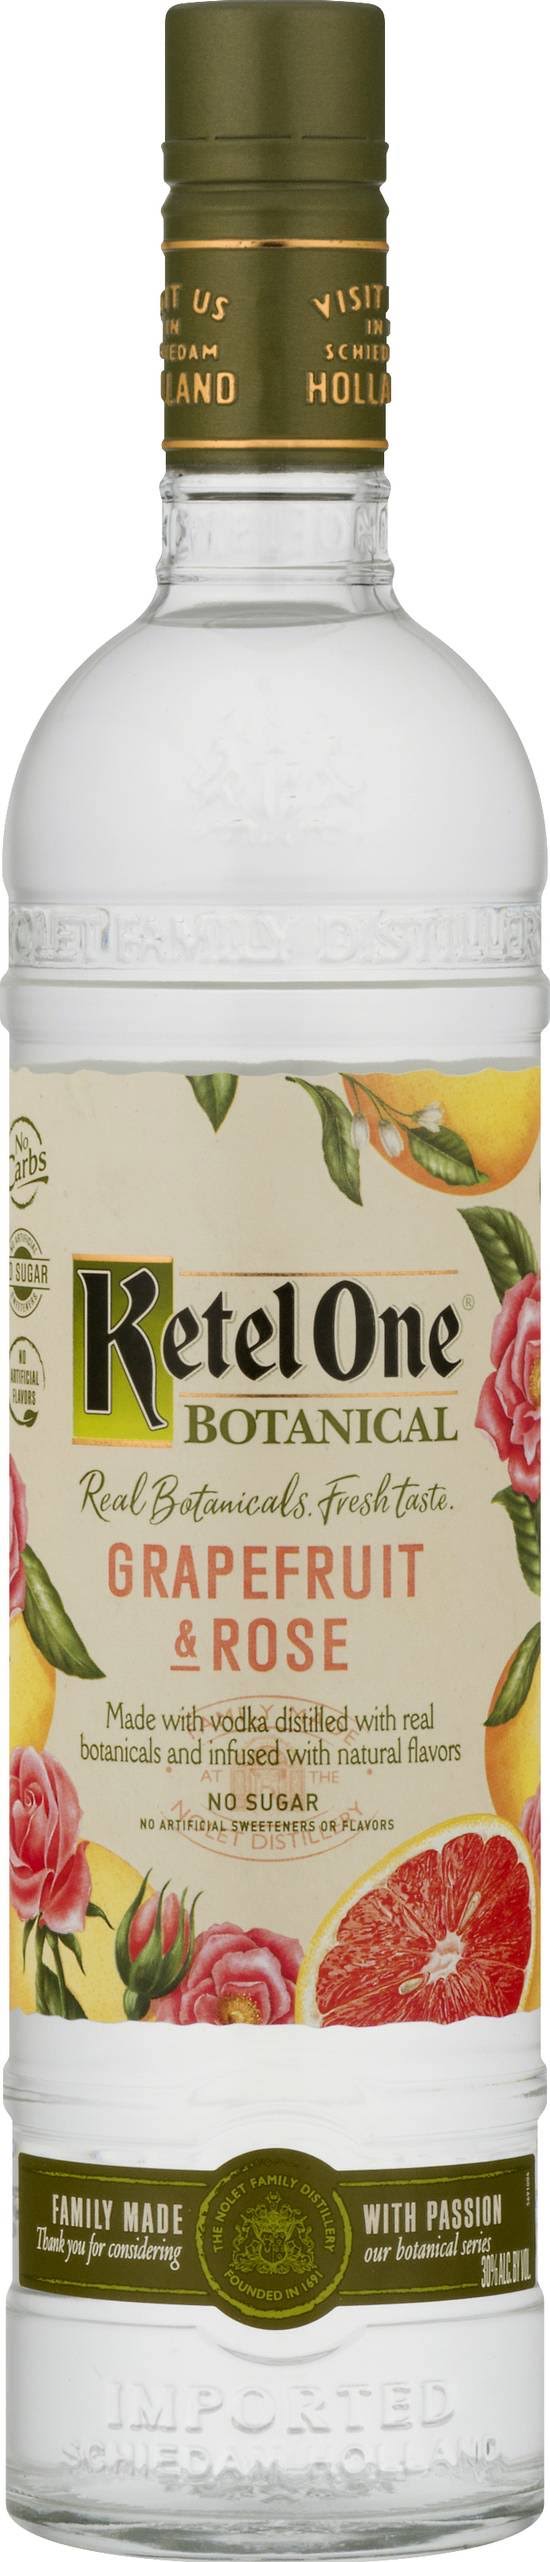 Ketel One Botanicals Grapefruit and Rose, 70 CL | Shop Now at The Drink Garden